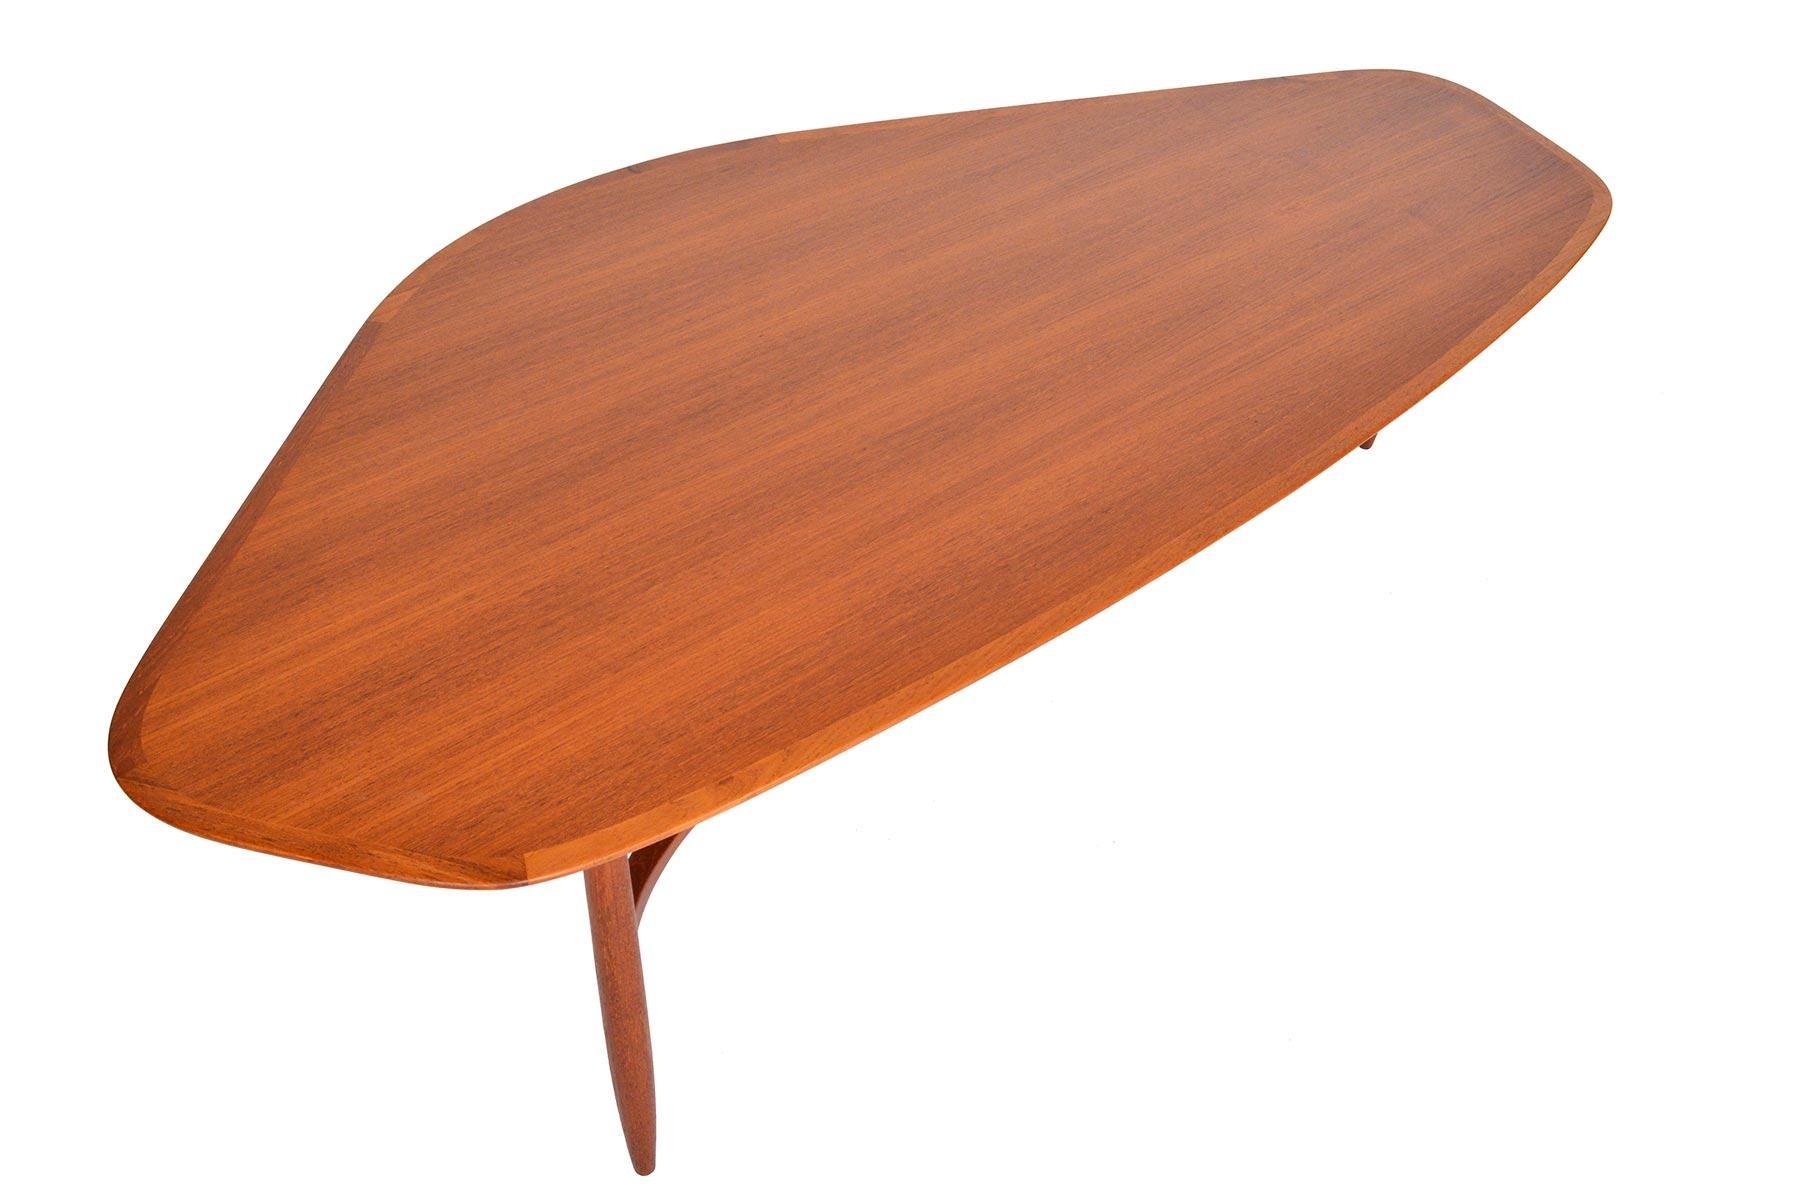 Sweeping angles and a long low design characterize this stunning Danish modern teak coffee table. Featuring a unique shape, this table is banded in a sleek teak frame. A beautiful three leg base is supported with sculpted braces. Recently refinished